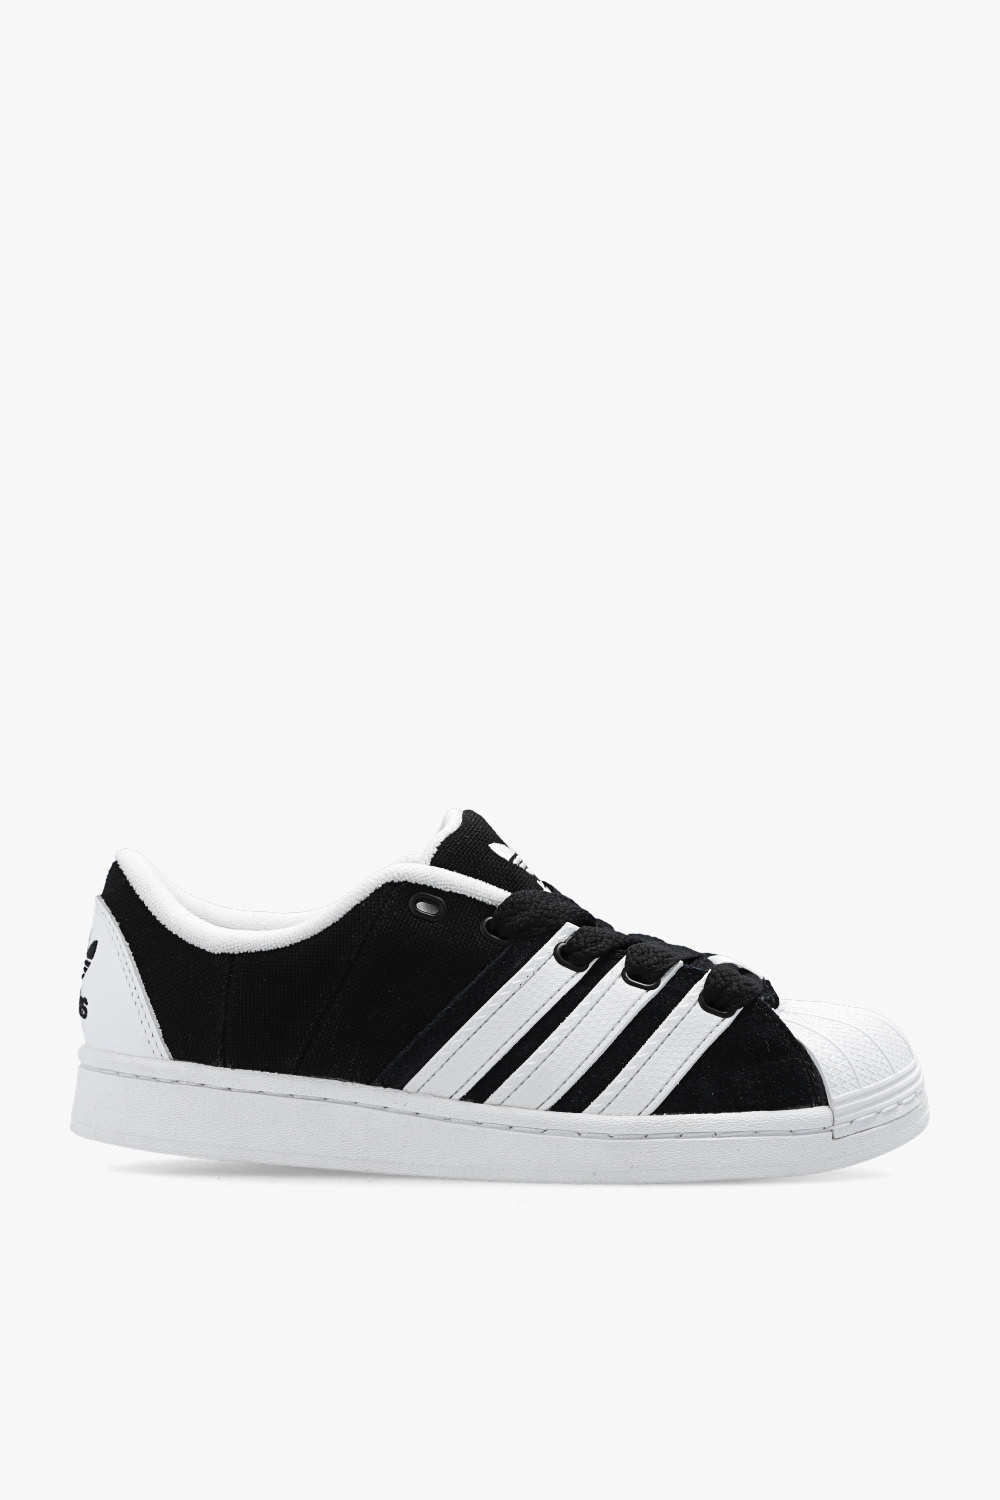 | adults sneakers ideas for Men\'s info poster adidas StclaircomoShops ADIDAS Shoes | SUPERMODIFIED\' girls dress | \'SUPERSTAR Originals